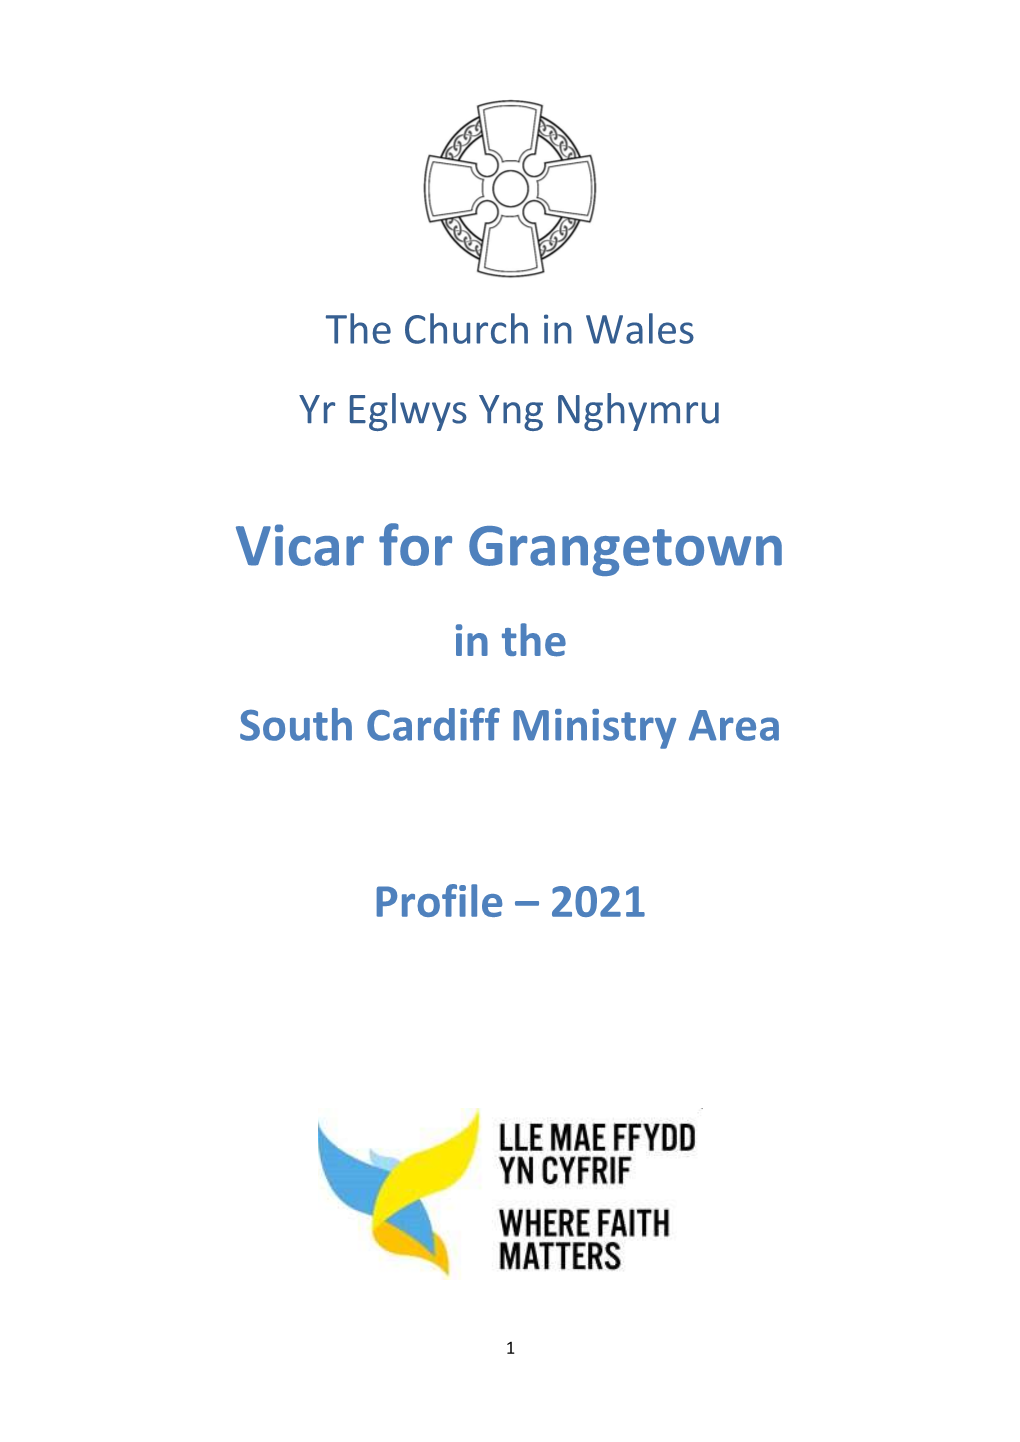 Vicar for Grangetown in the South Cardiff Ministry Area